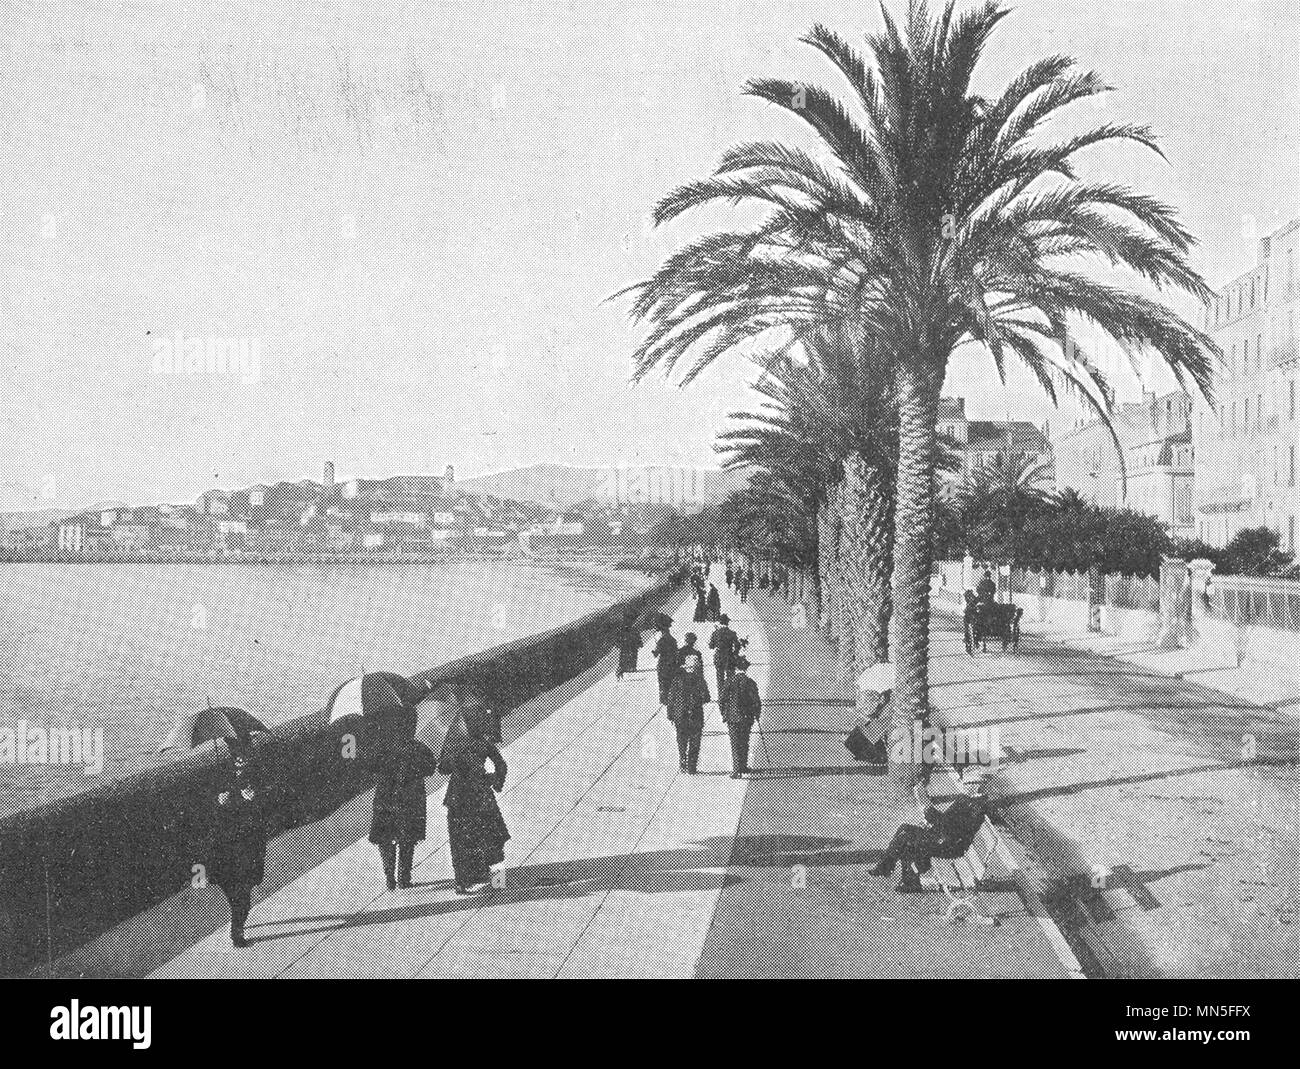 Cannes boulevard croisette Black and White Stock Photos & Images - Alamy